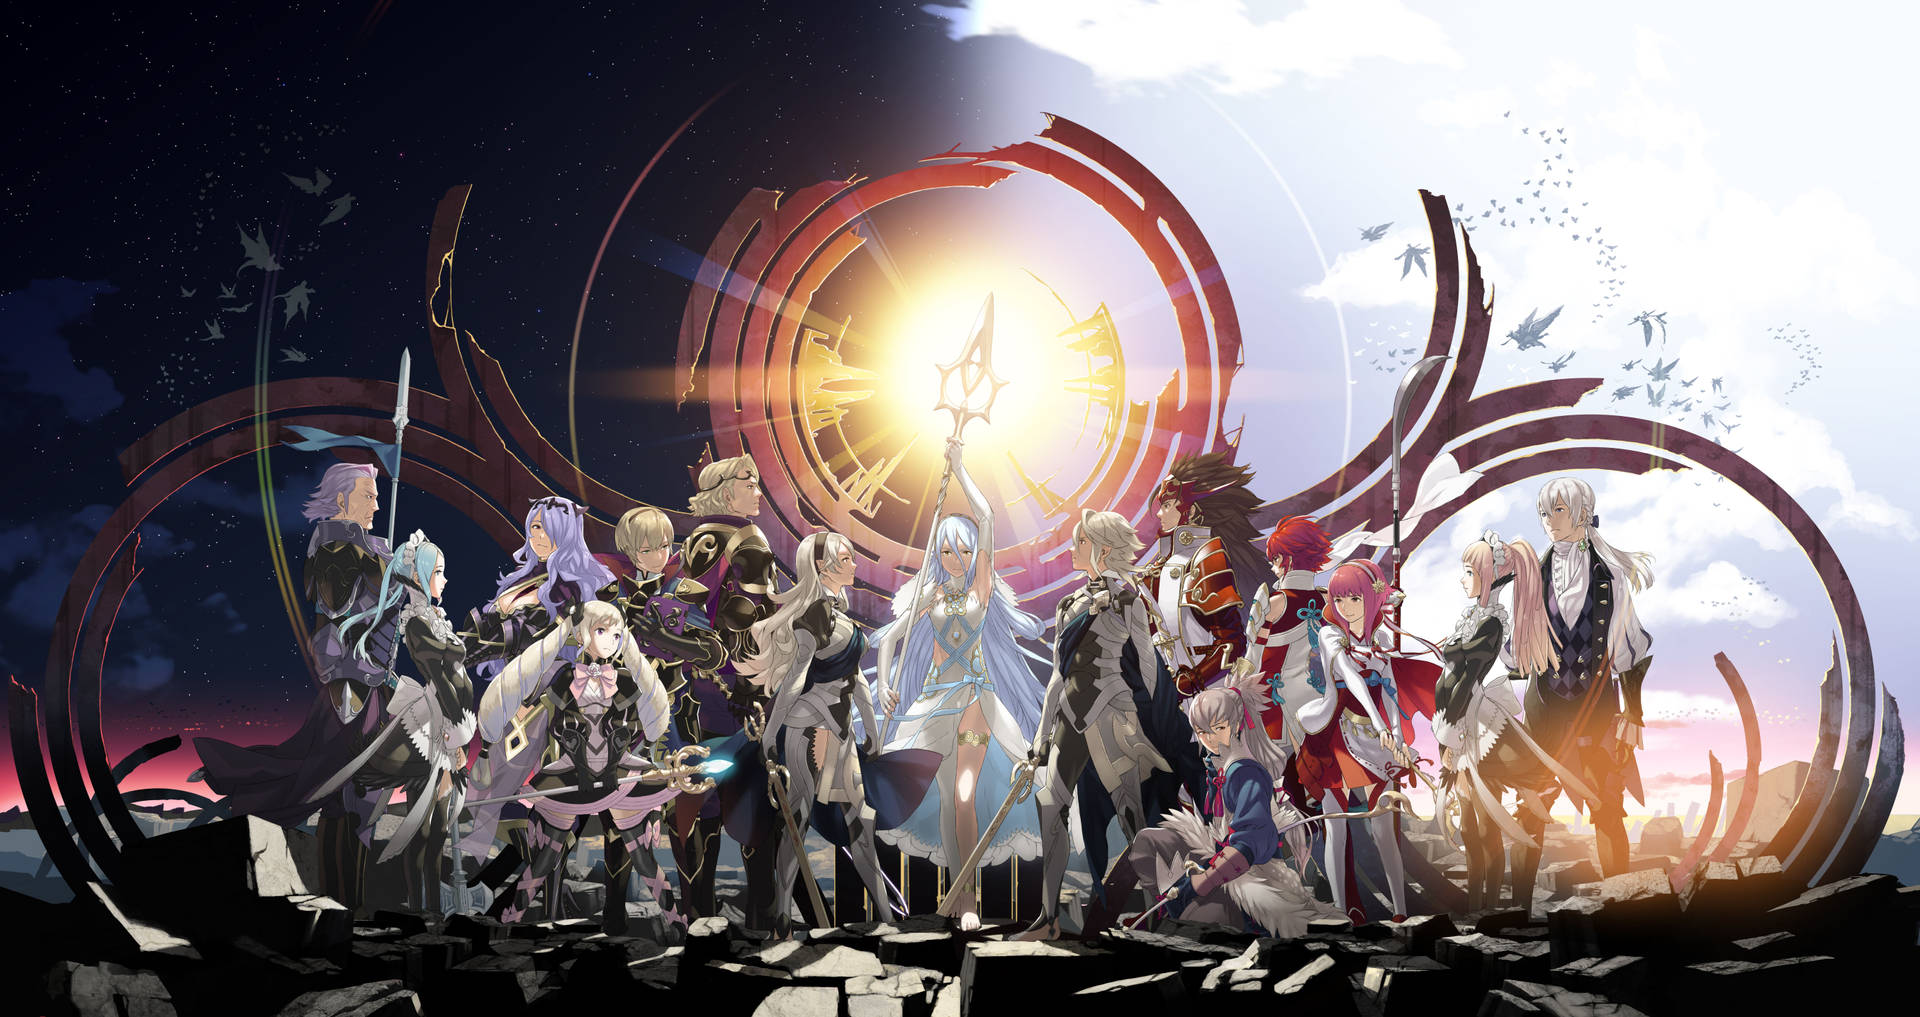 Become a Hero of Legend with Fire Emblem Wallpaper